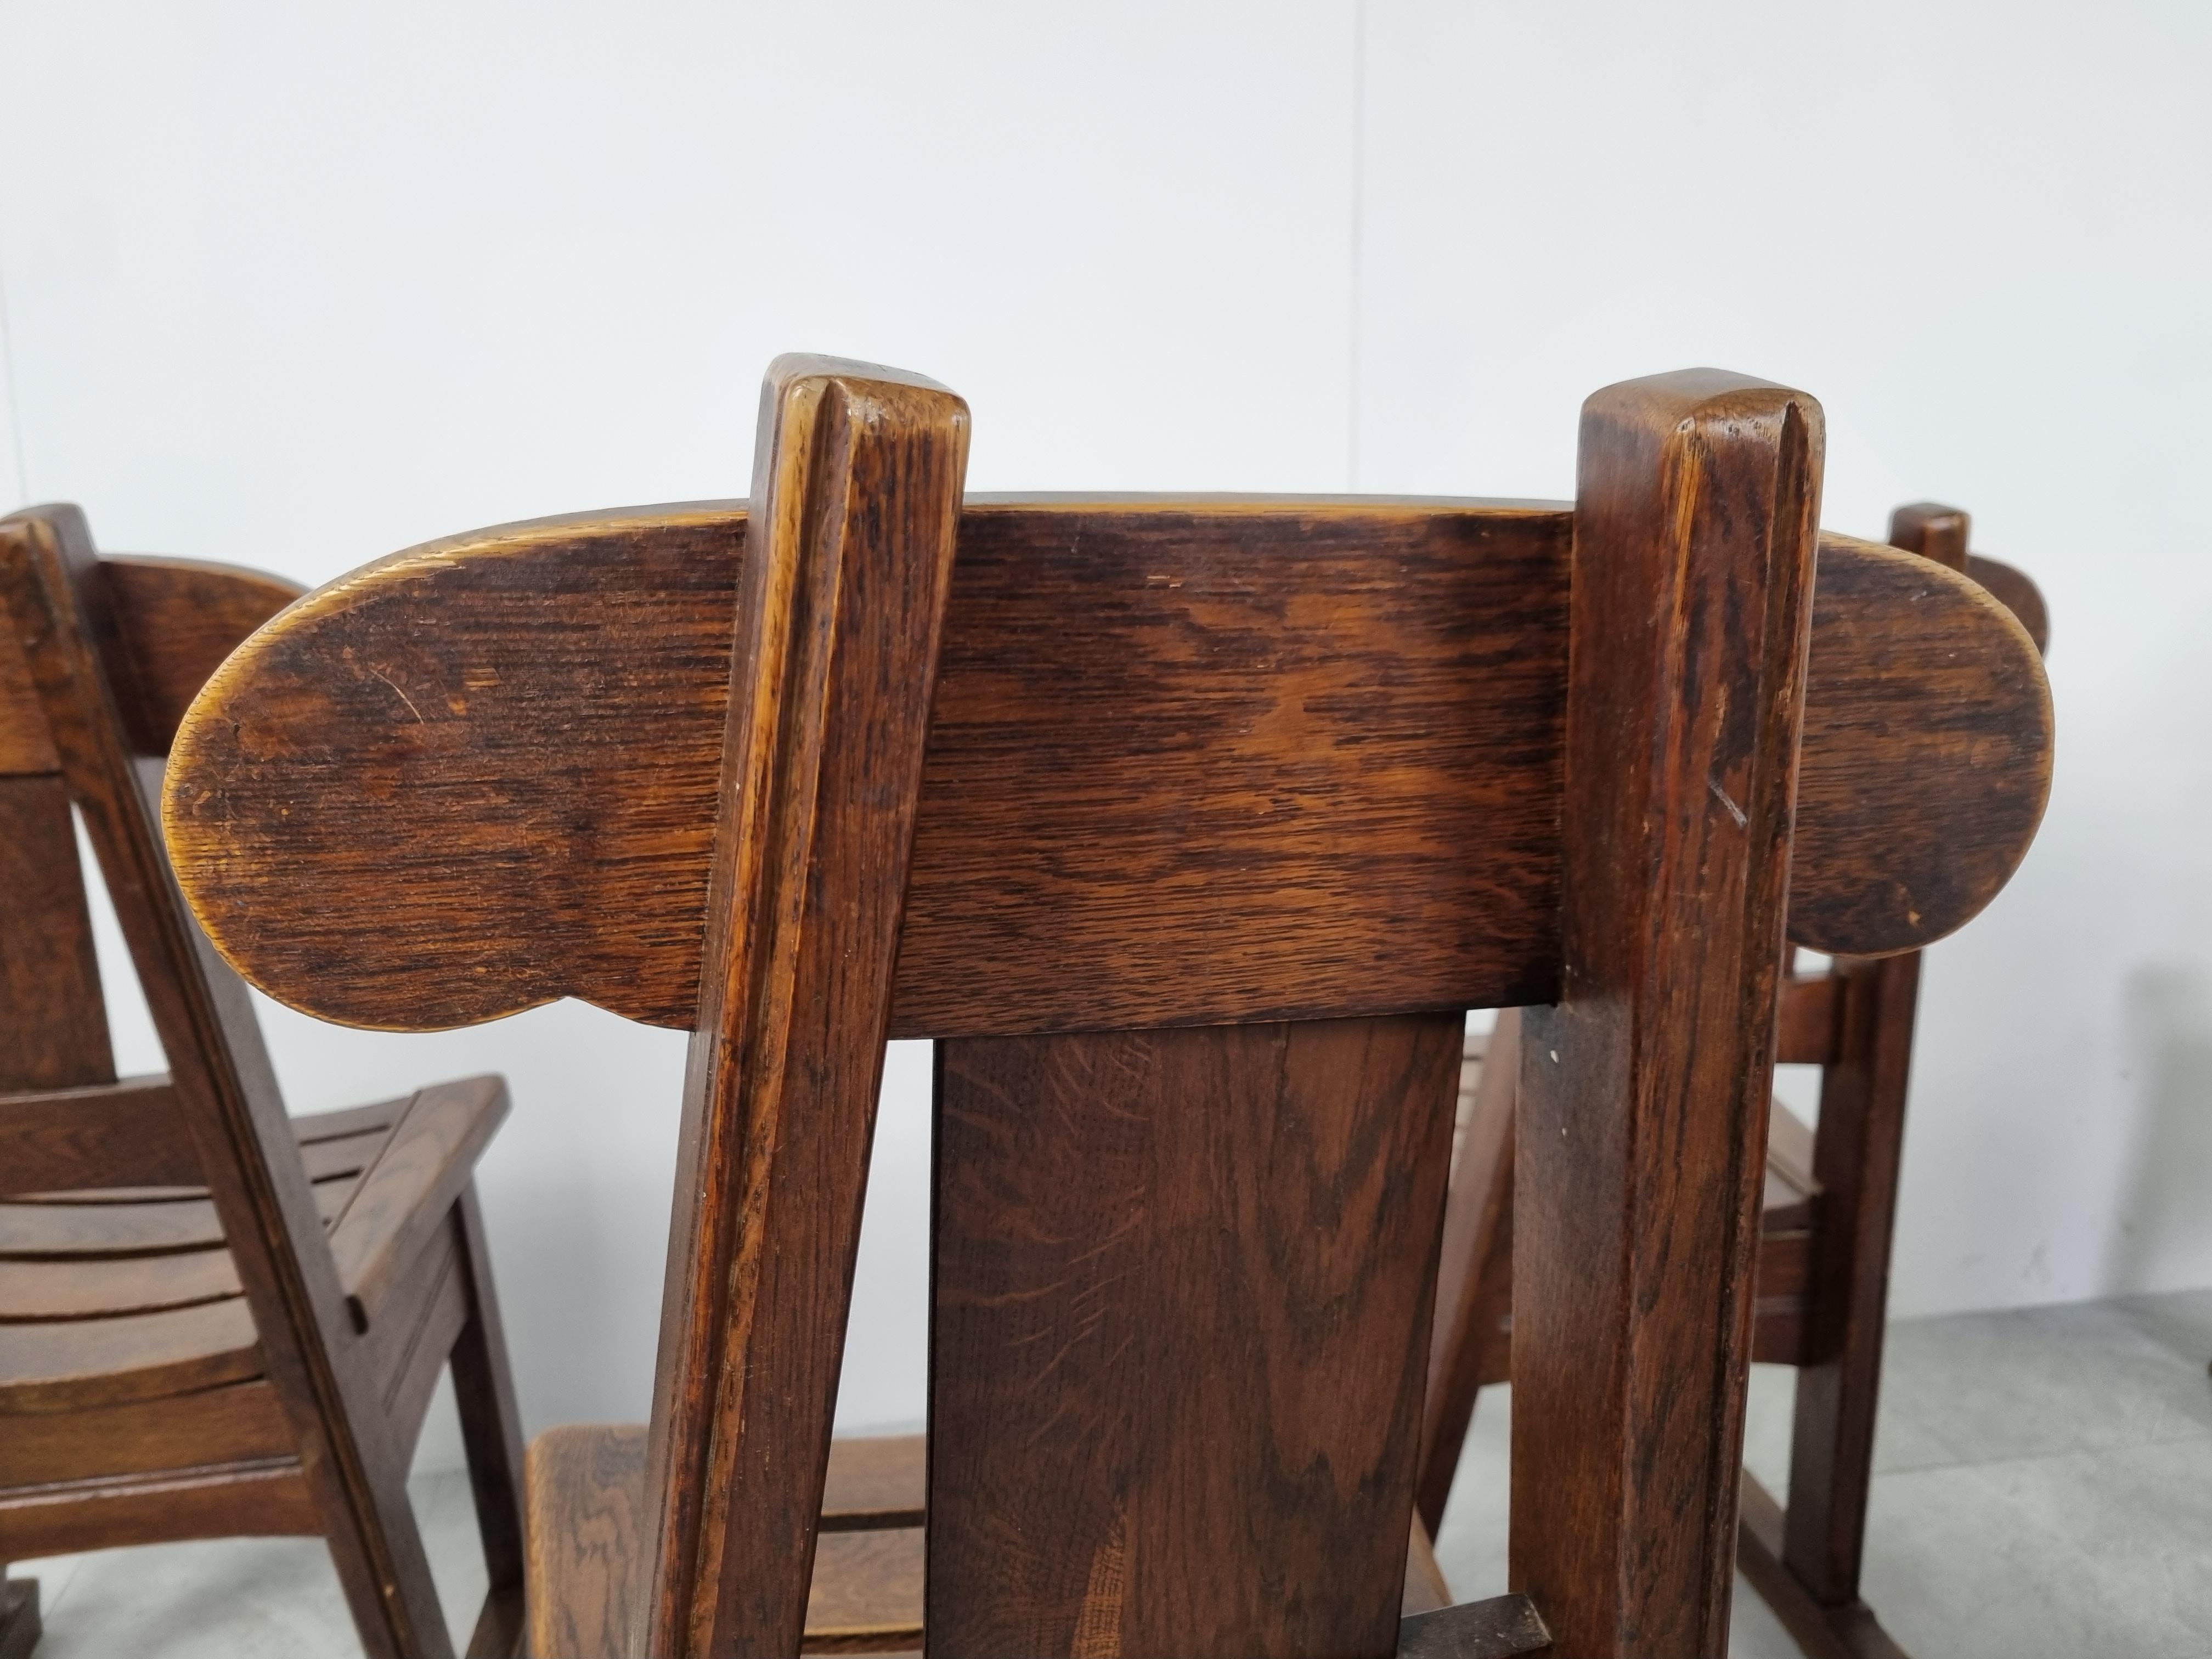 Mid century solid elm wood brutalist dining chairs.

Beautiful, timeless design with sledge bases/feet.

Good original condition.

1960s - Germany

Dimensions:
Height: 97cm/38.18